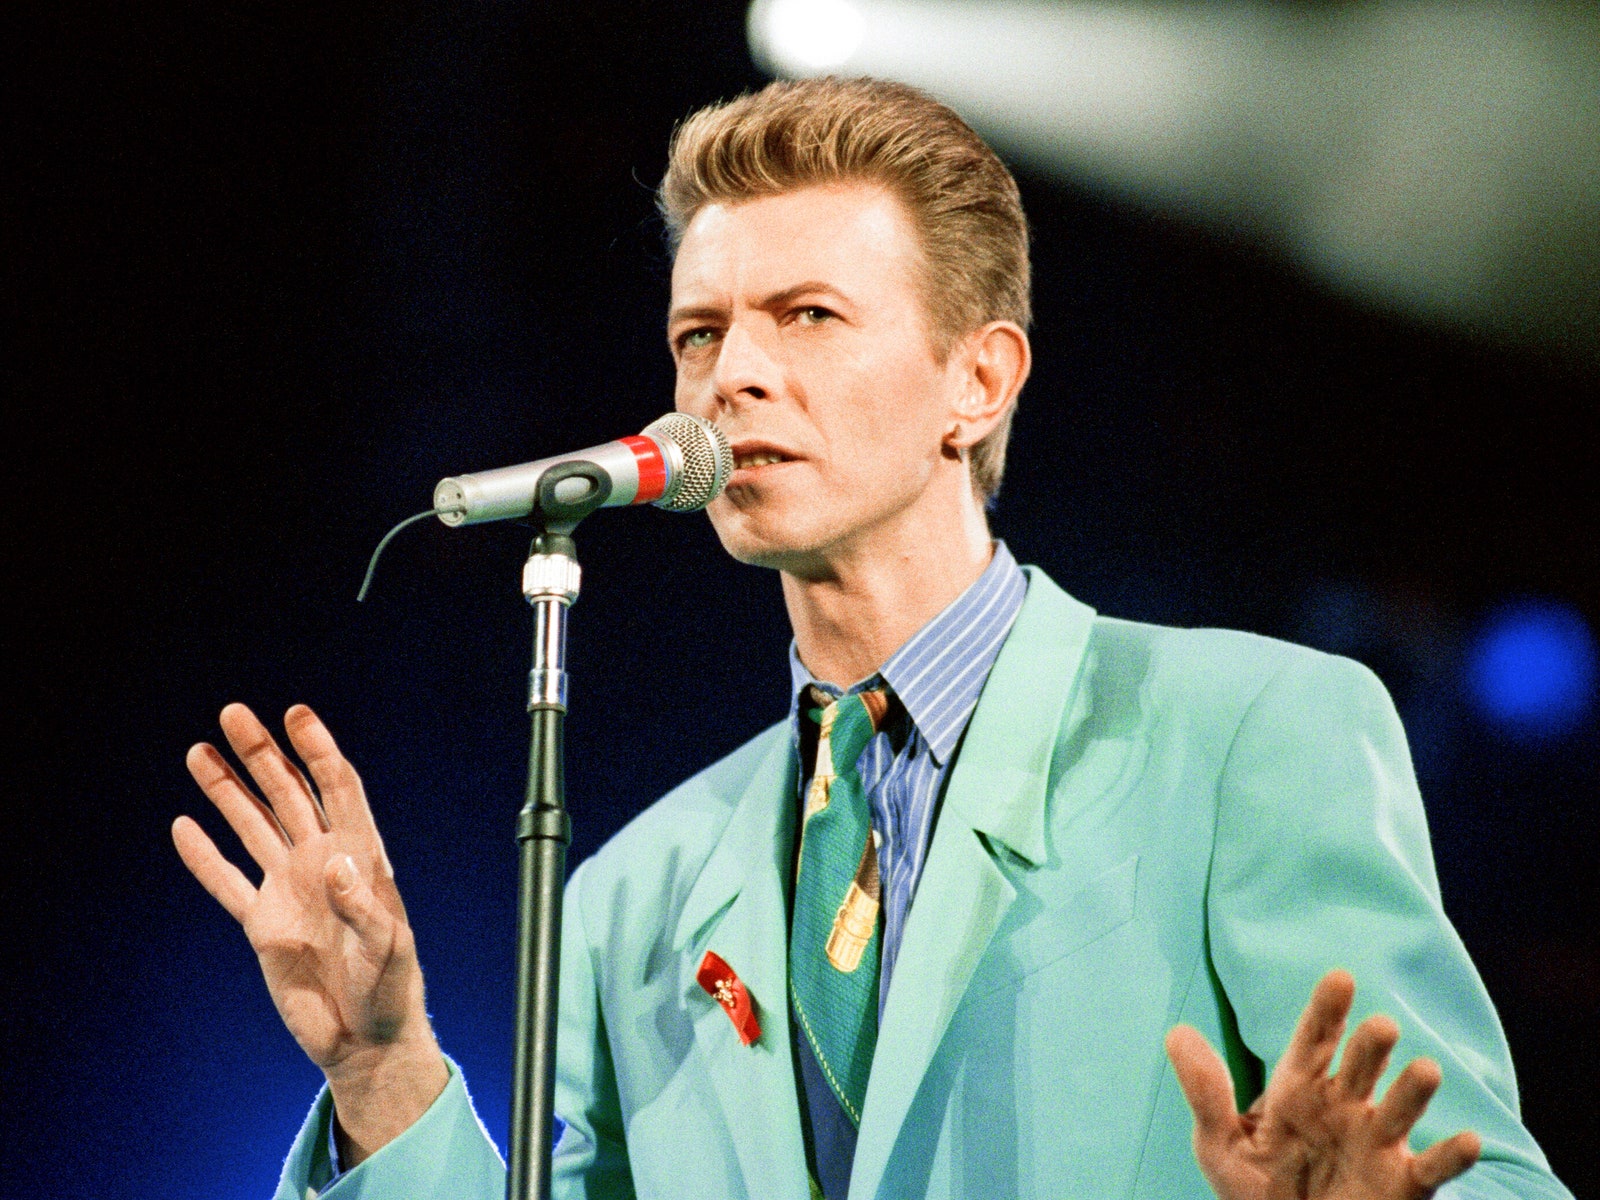 David Bowie’s Homes: Here’s Where the Trailblazing Musician Lived Over the Years